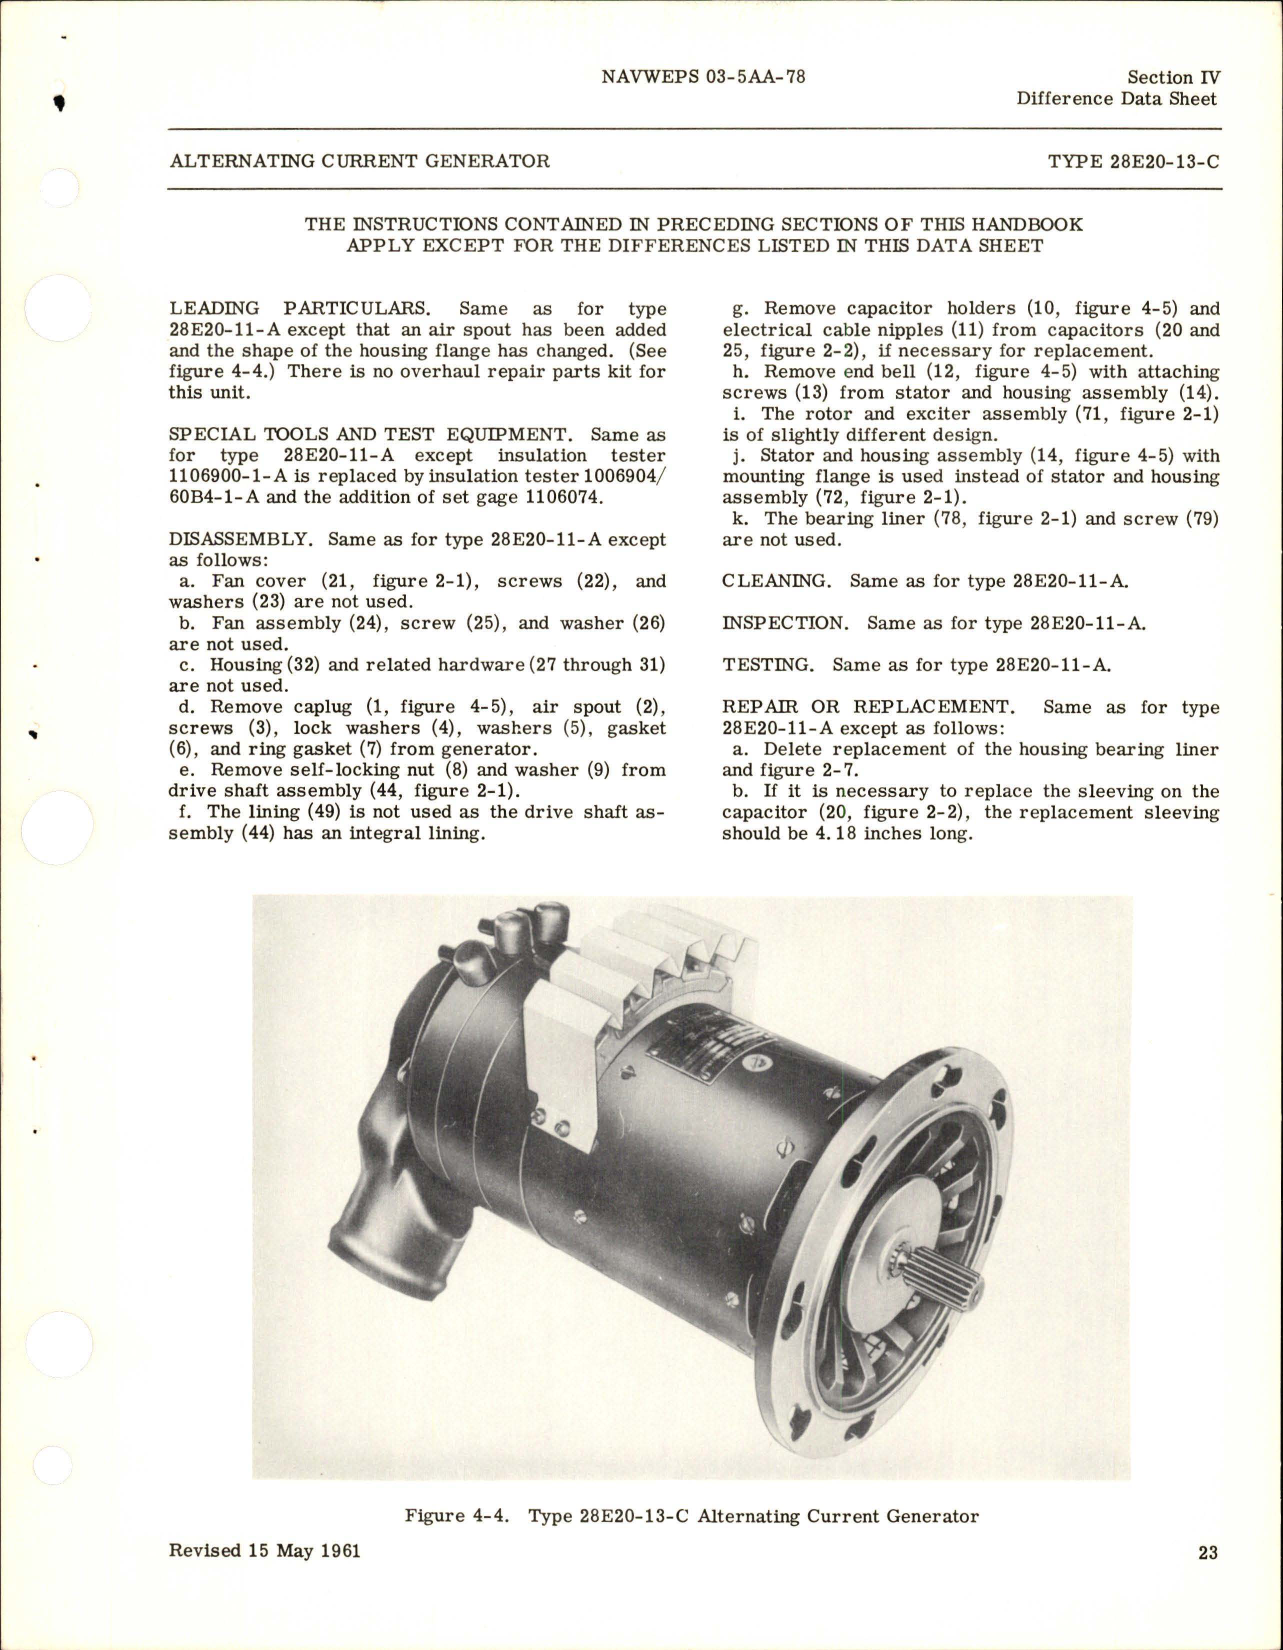 Sample page 7 from AirCorps Library document: Overhaul Instructions for Alternating Current Generator